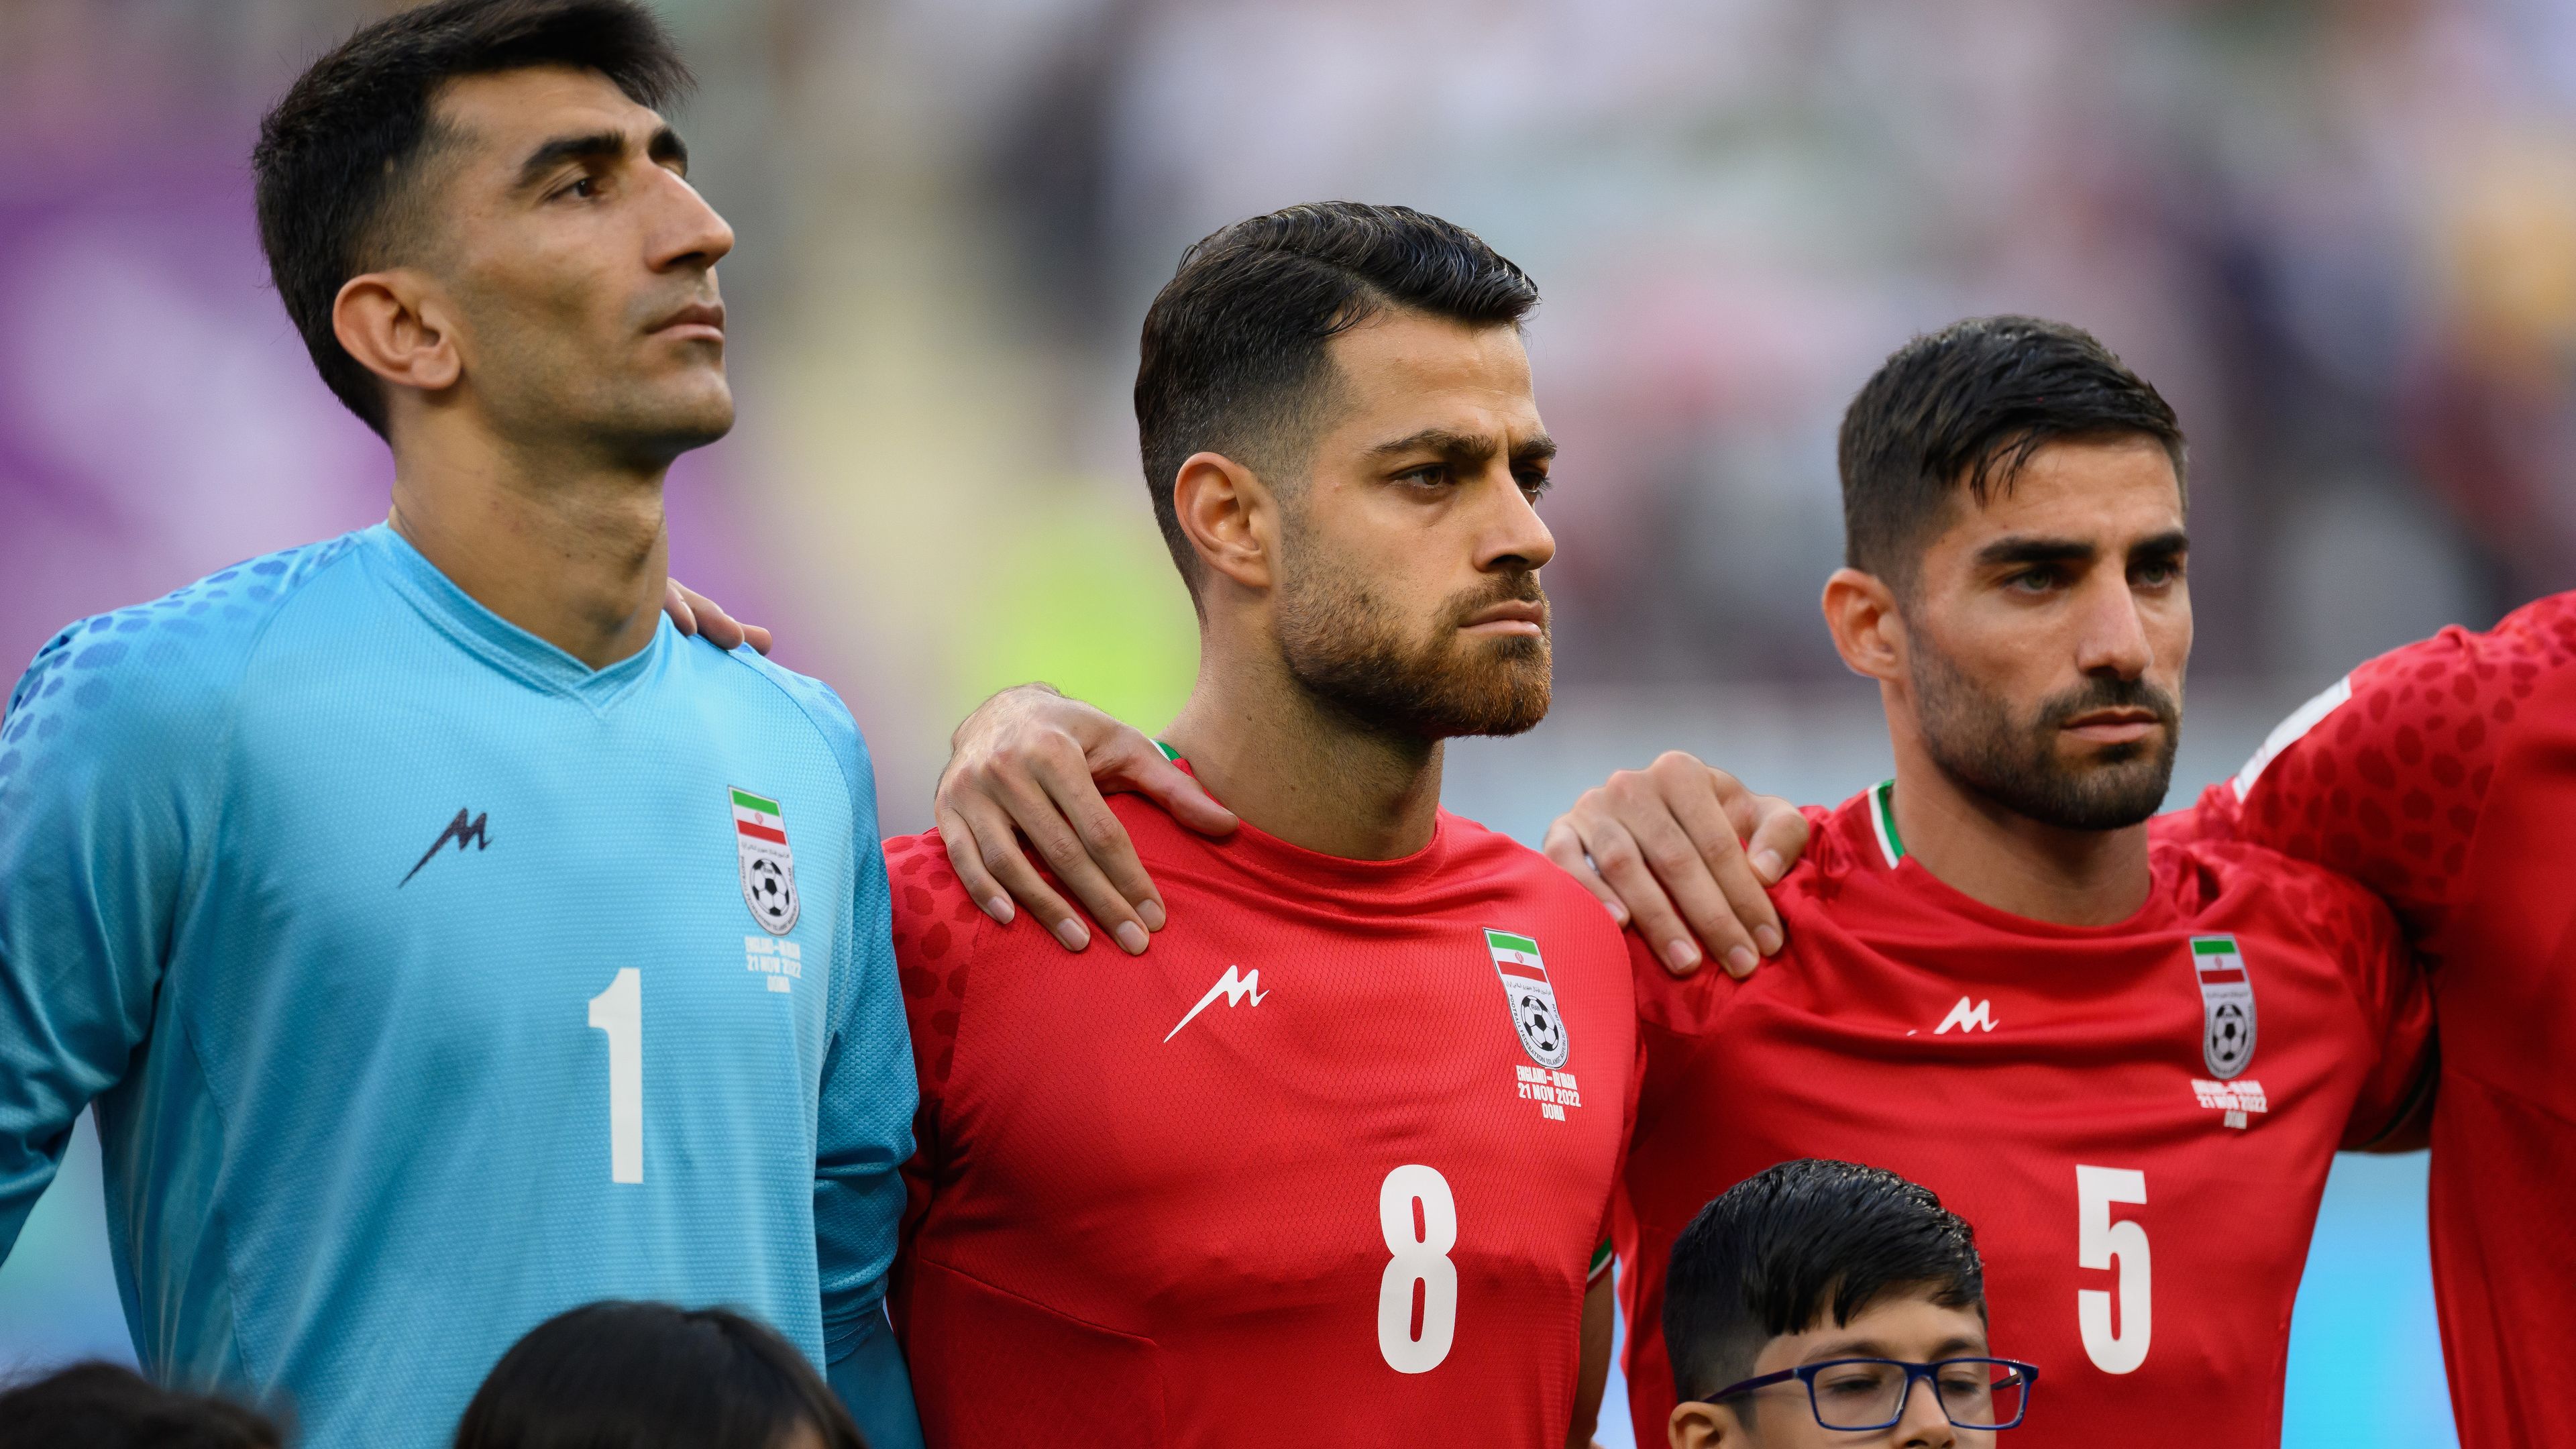 Families of Iran stars threatened with 'violence and torture' after World Cup protest